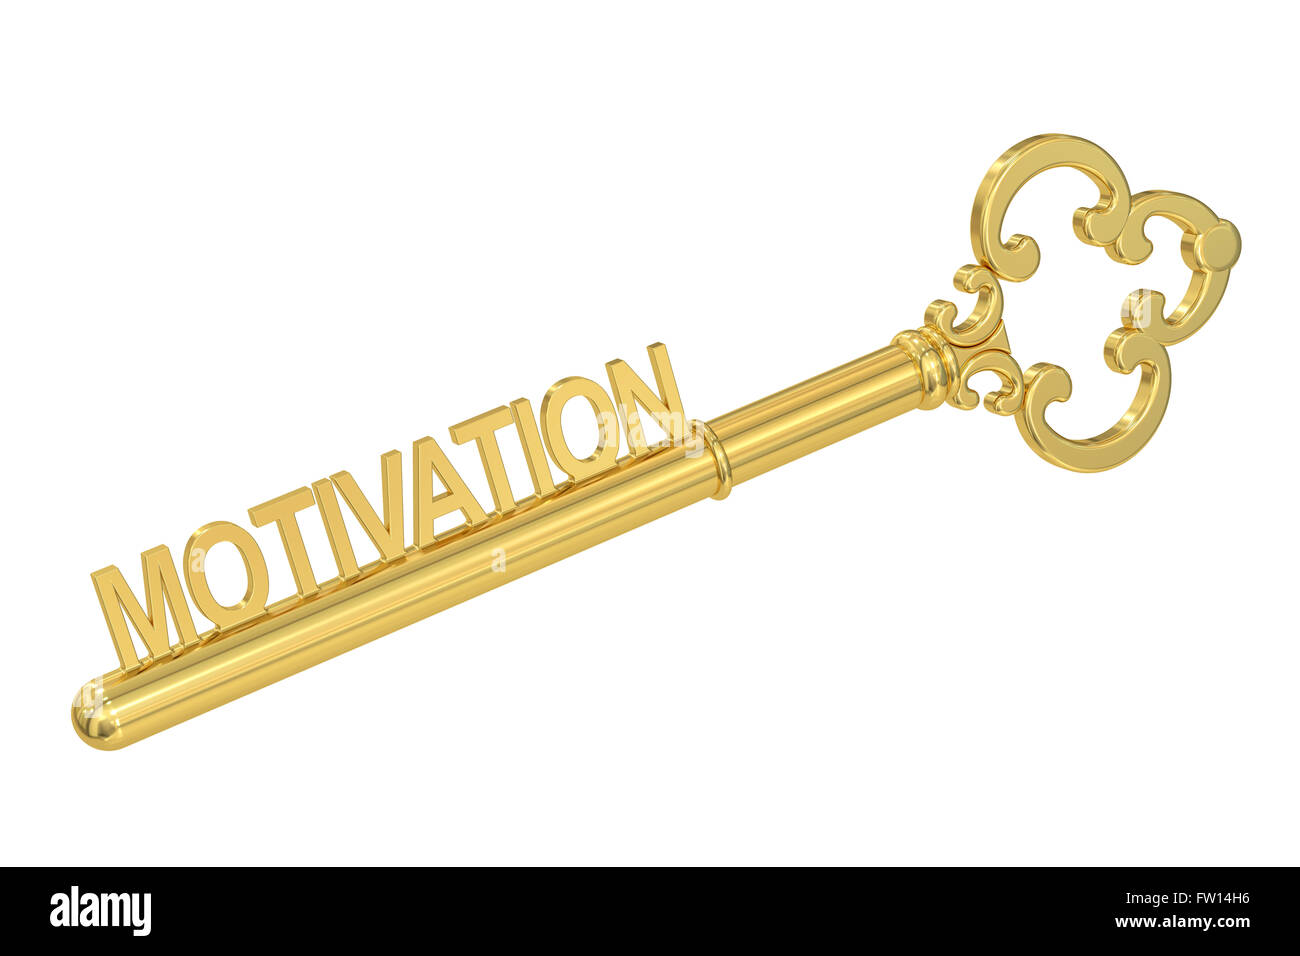 Motivation concept with golden key, 3D rendering Stock Photo